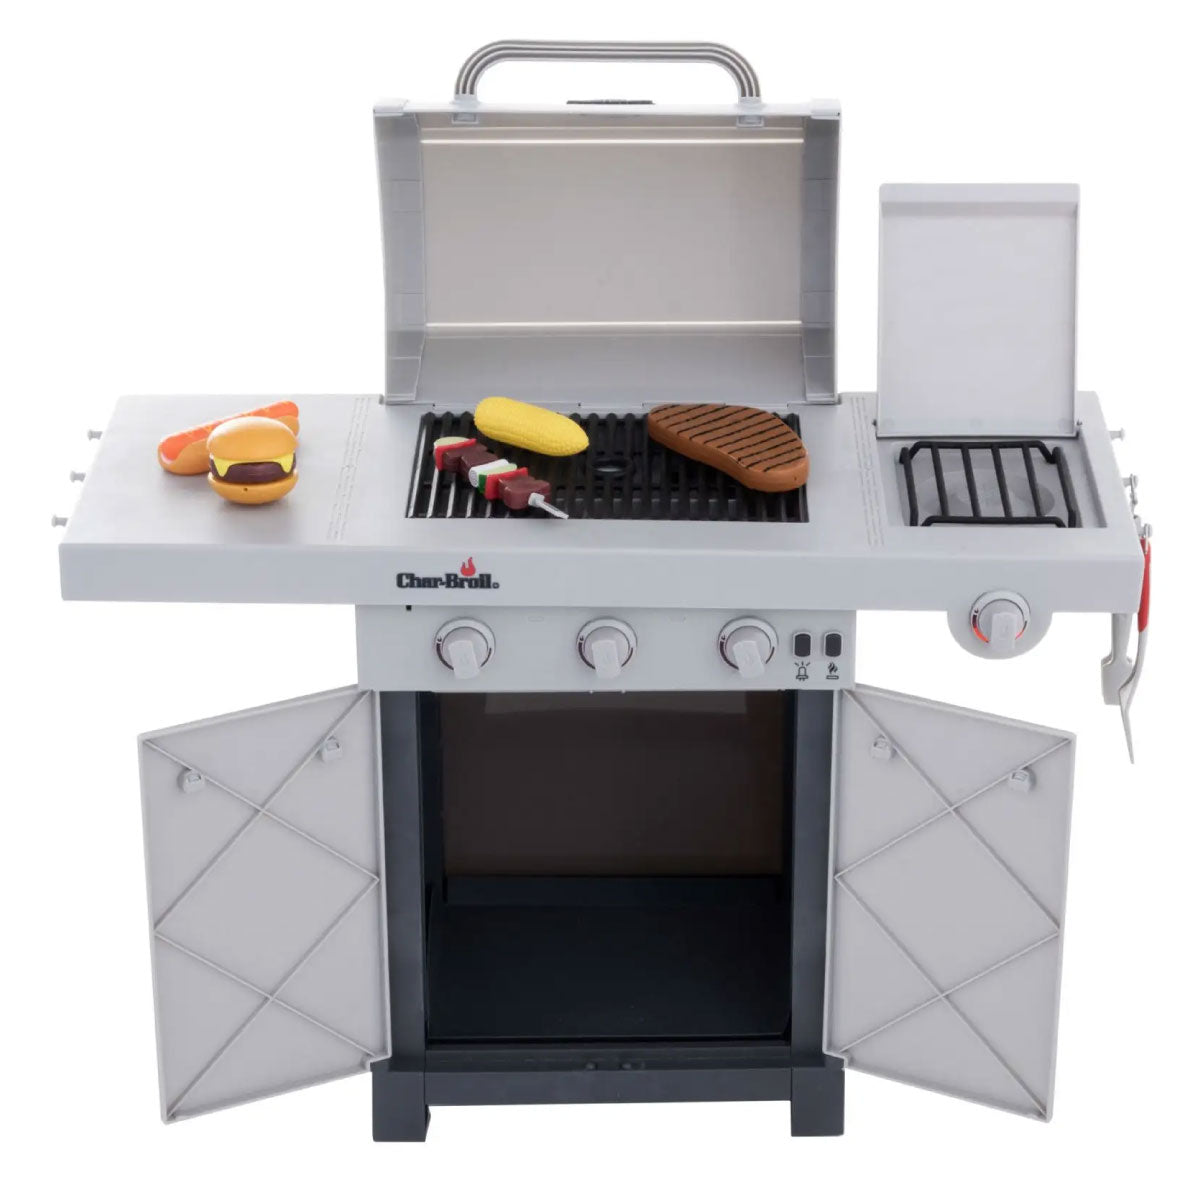 Char-Broil BBQ Play Set for Kids